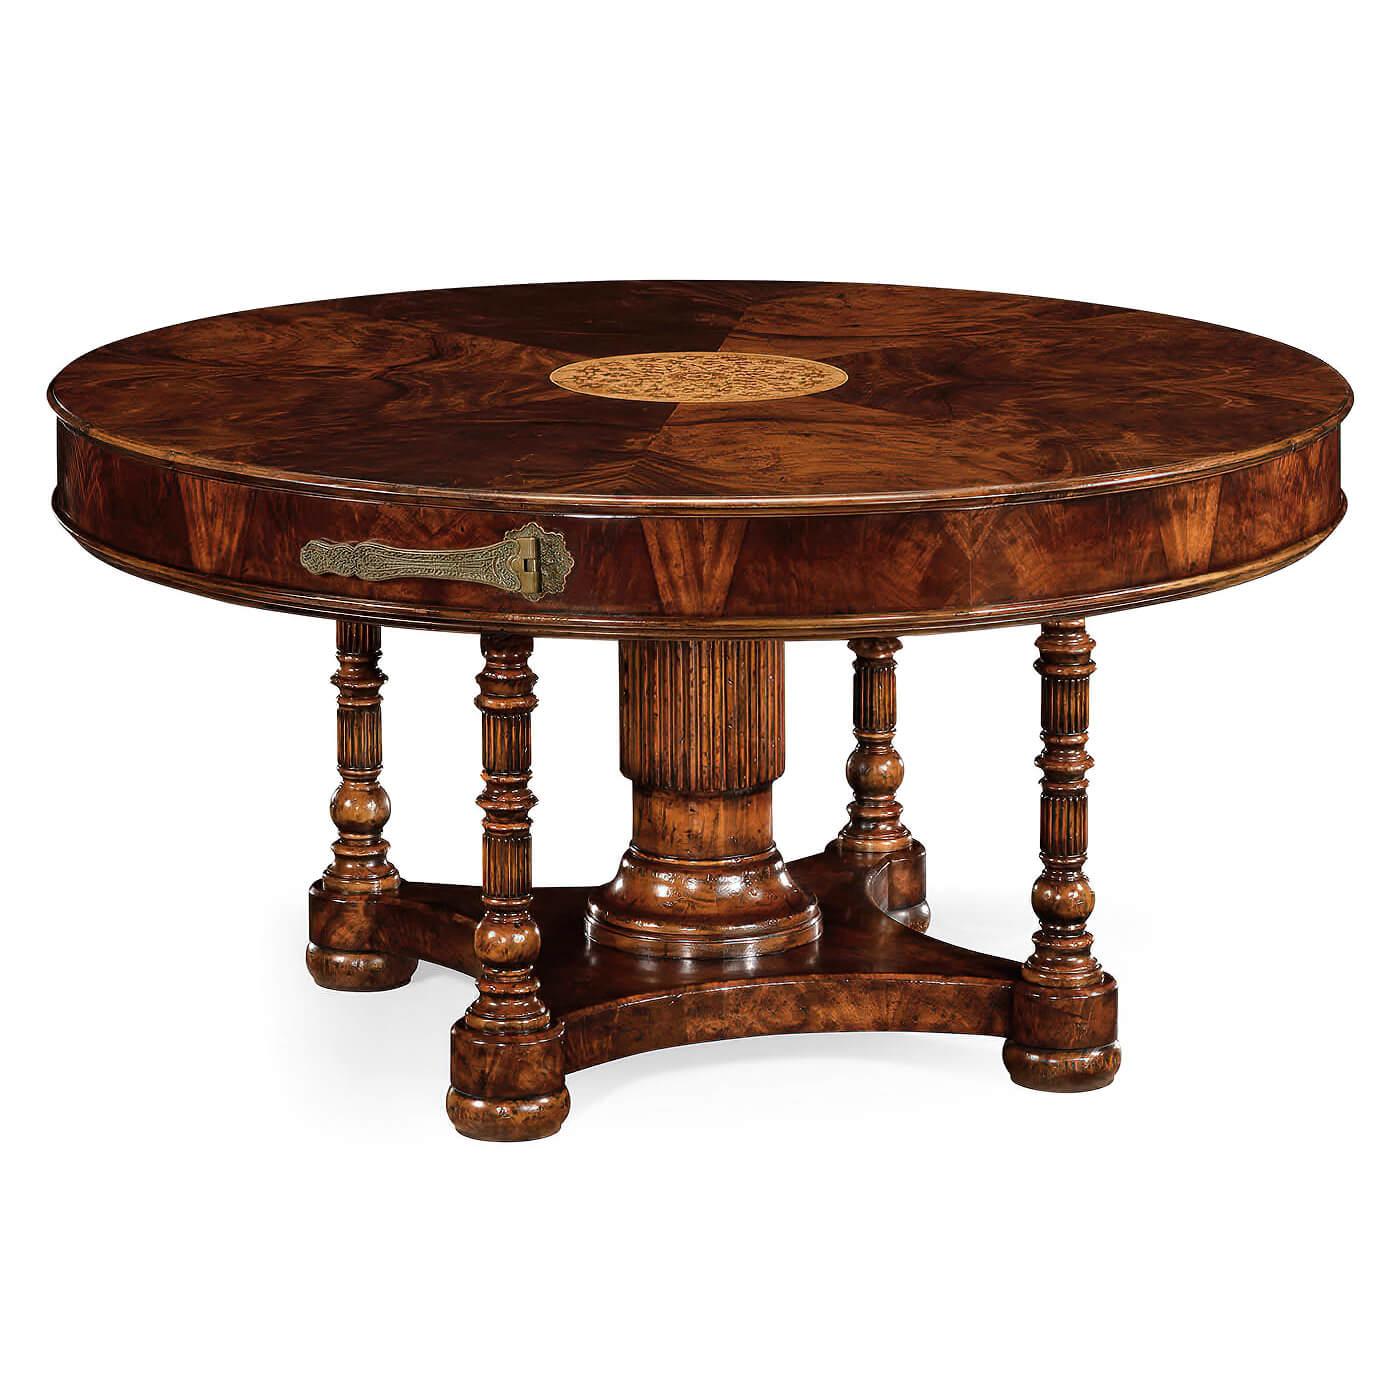 This exceptional table mechanically opens as you rotate the top. In the Georgian style, the 82